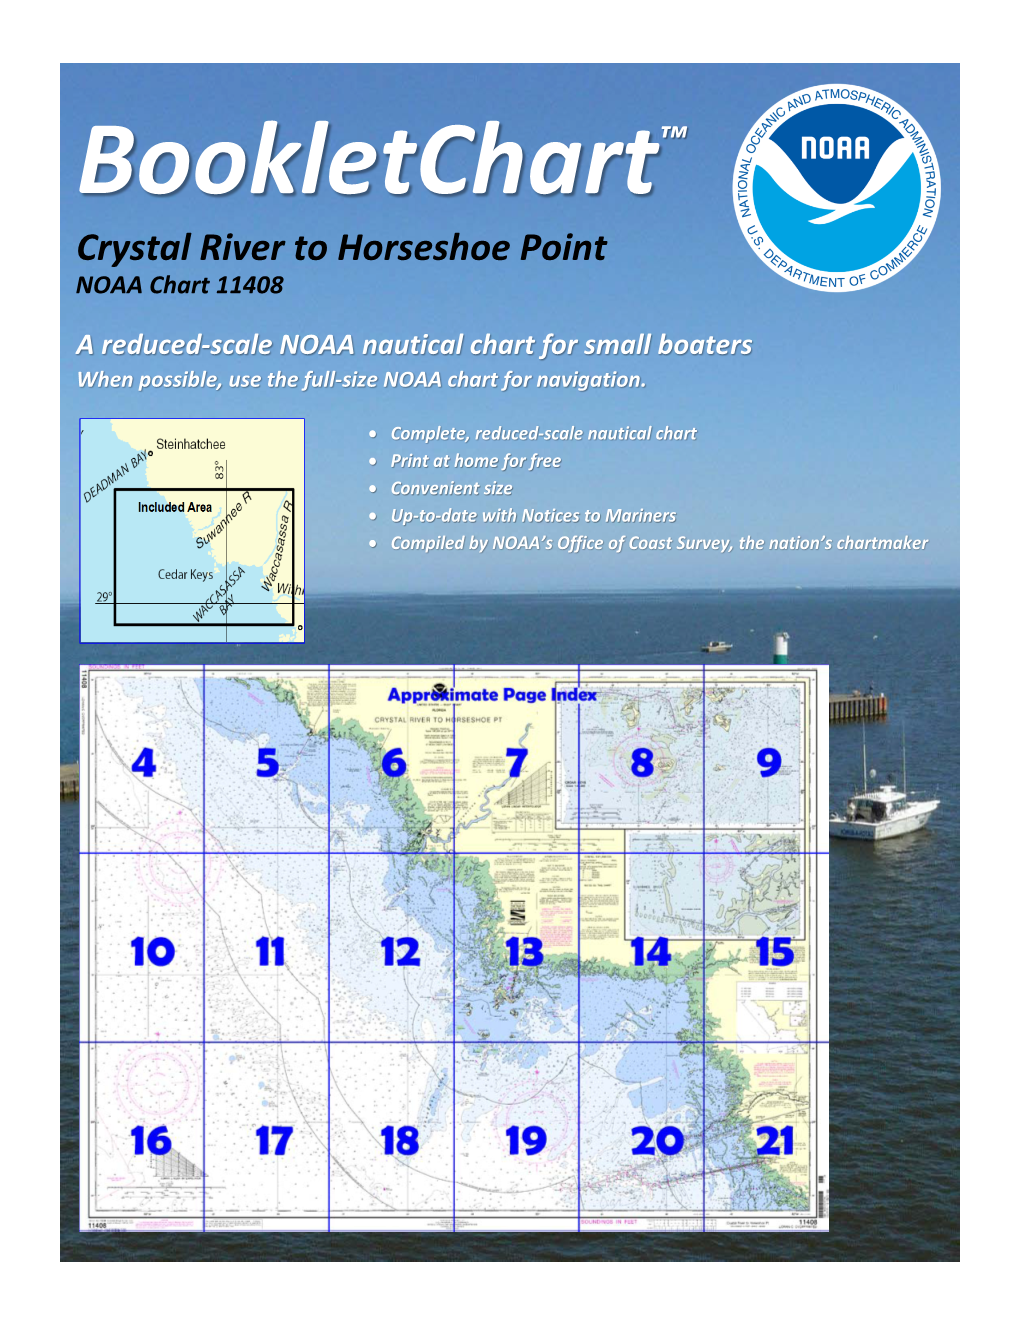 Bookletchart™ Crystal River to Horseshoe Point NOAA Chart 11408 a Reduced-Scale NOAA Nautical Chart for Small Boaters